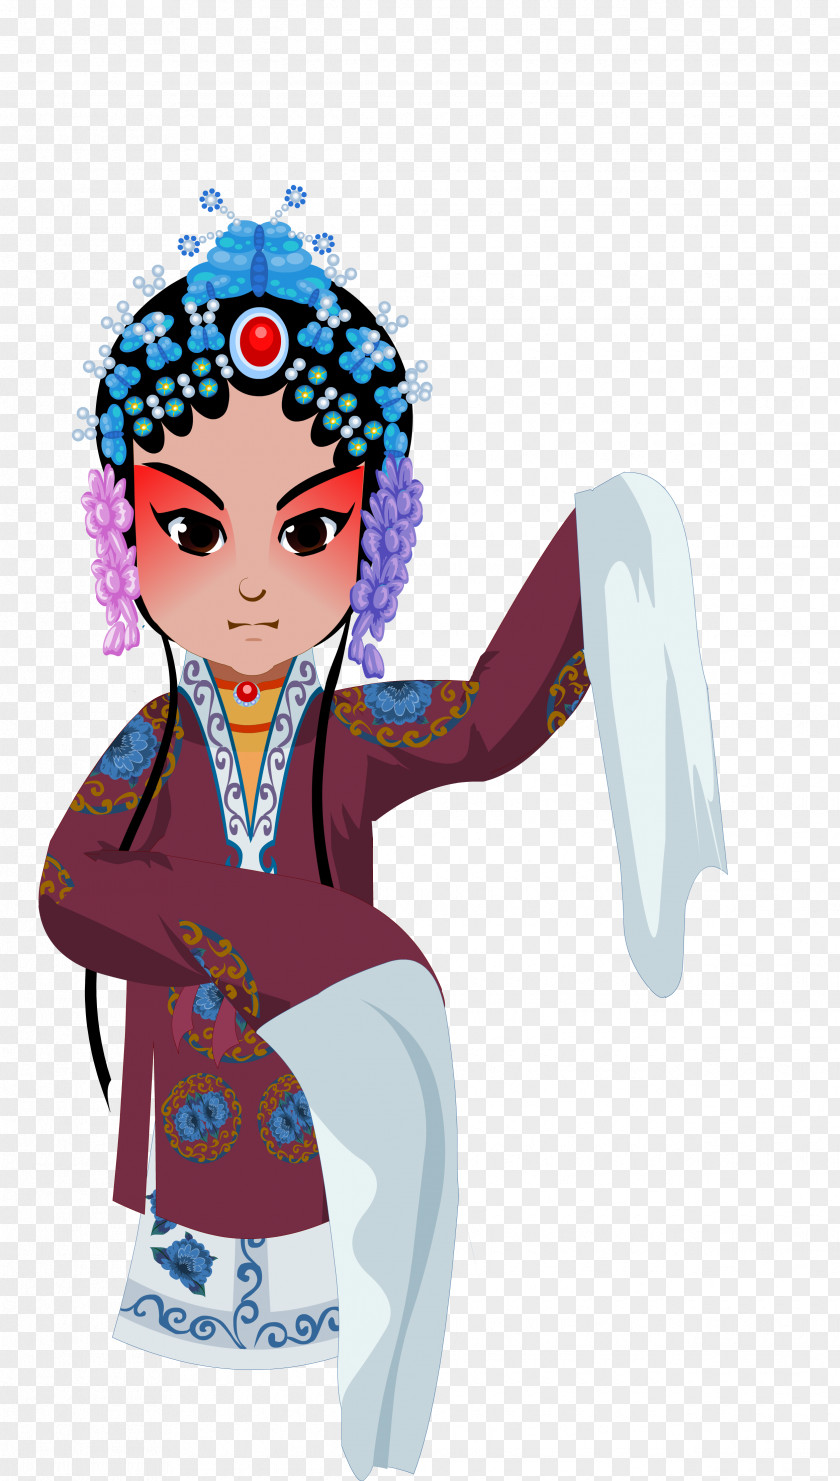 Chineseopera Flyer Illustration Cartoon Clothing Accessories Character Fashion PNG